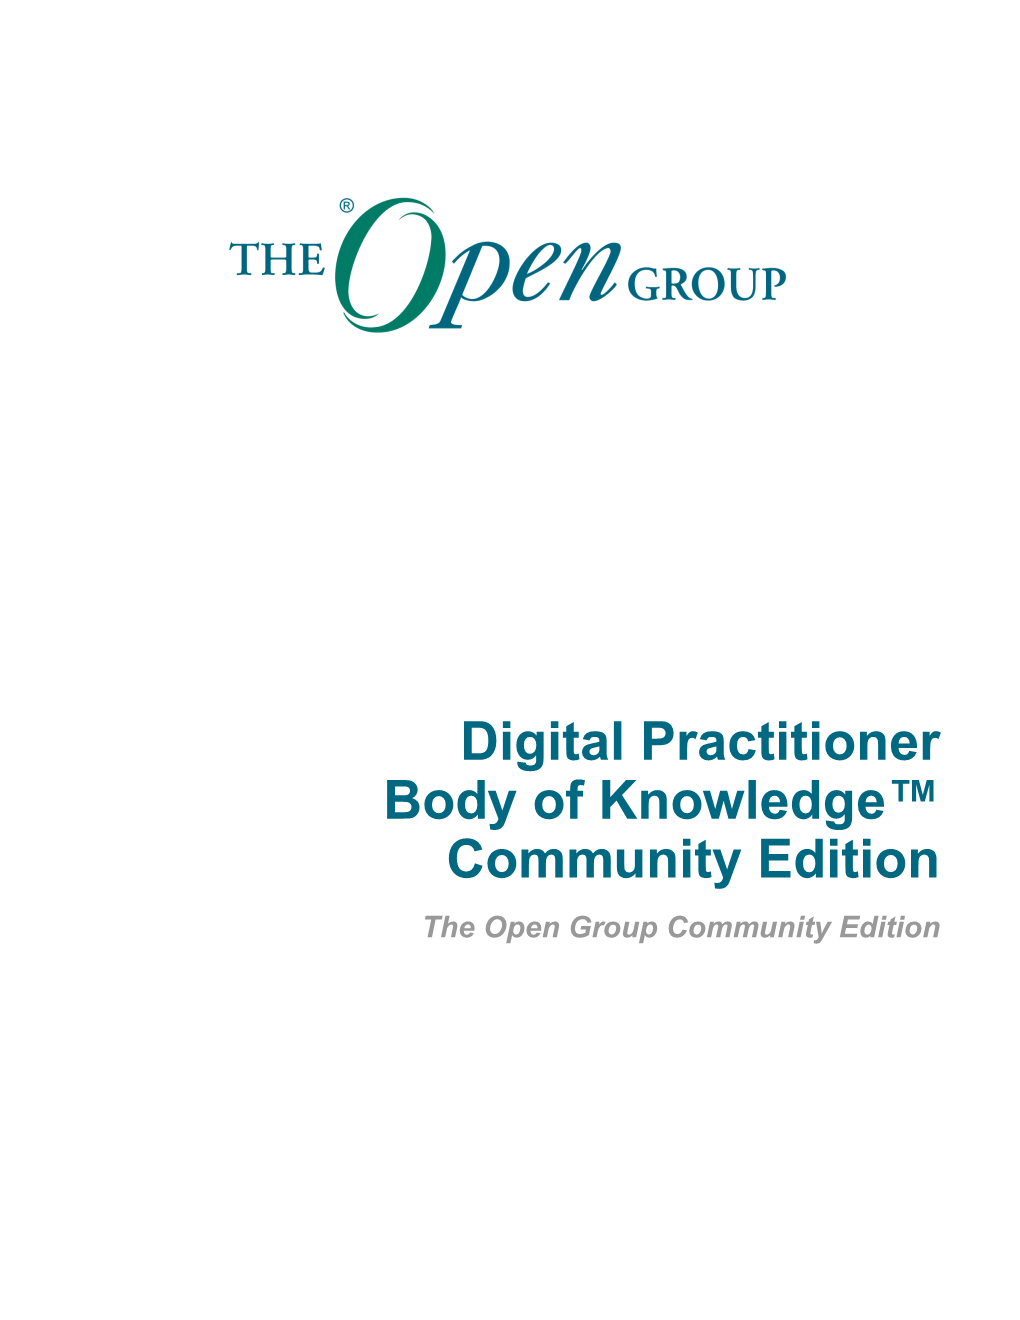 Digital Practitioner Body of Knowledge™ Community Edition the Open Group Community Edition Table of Contents